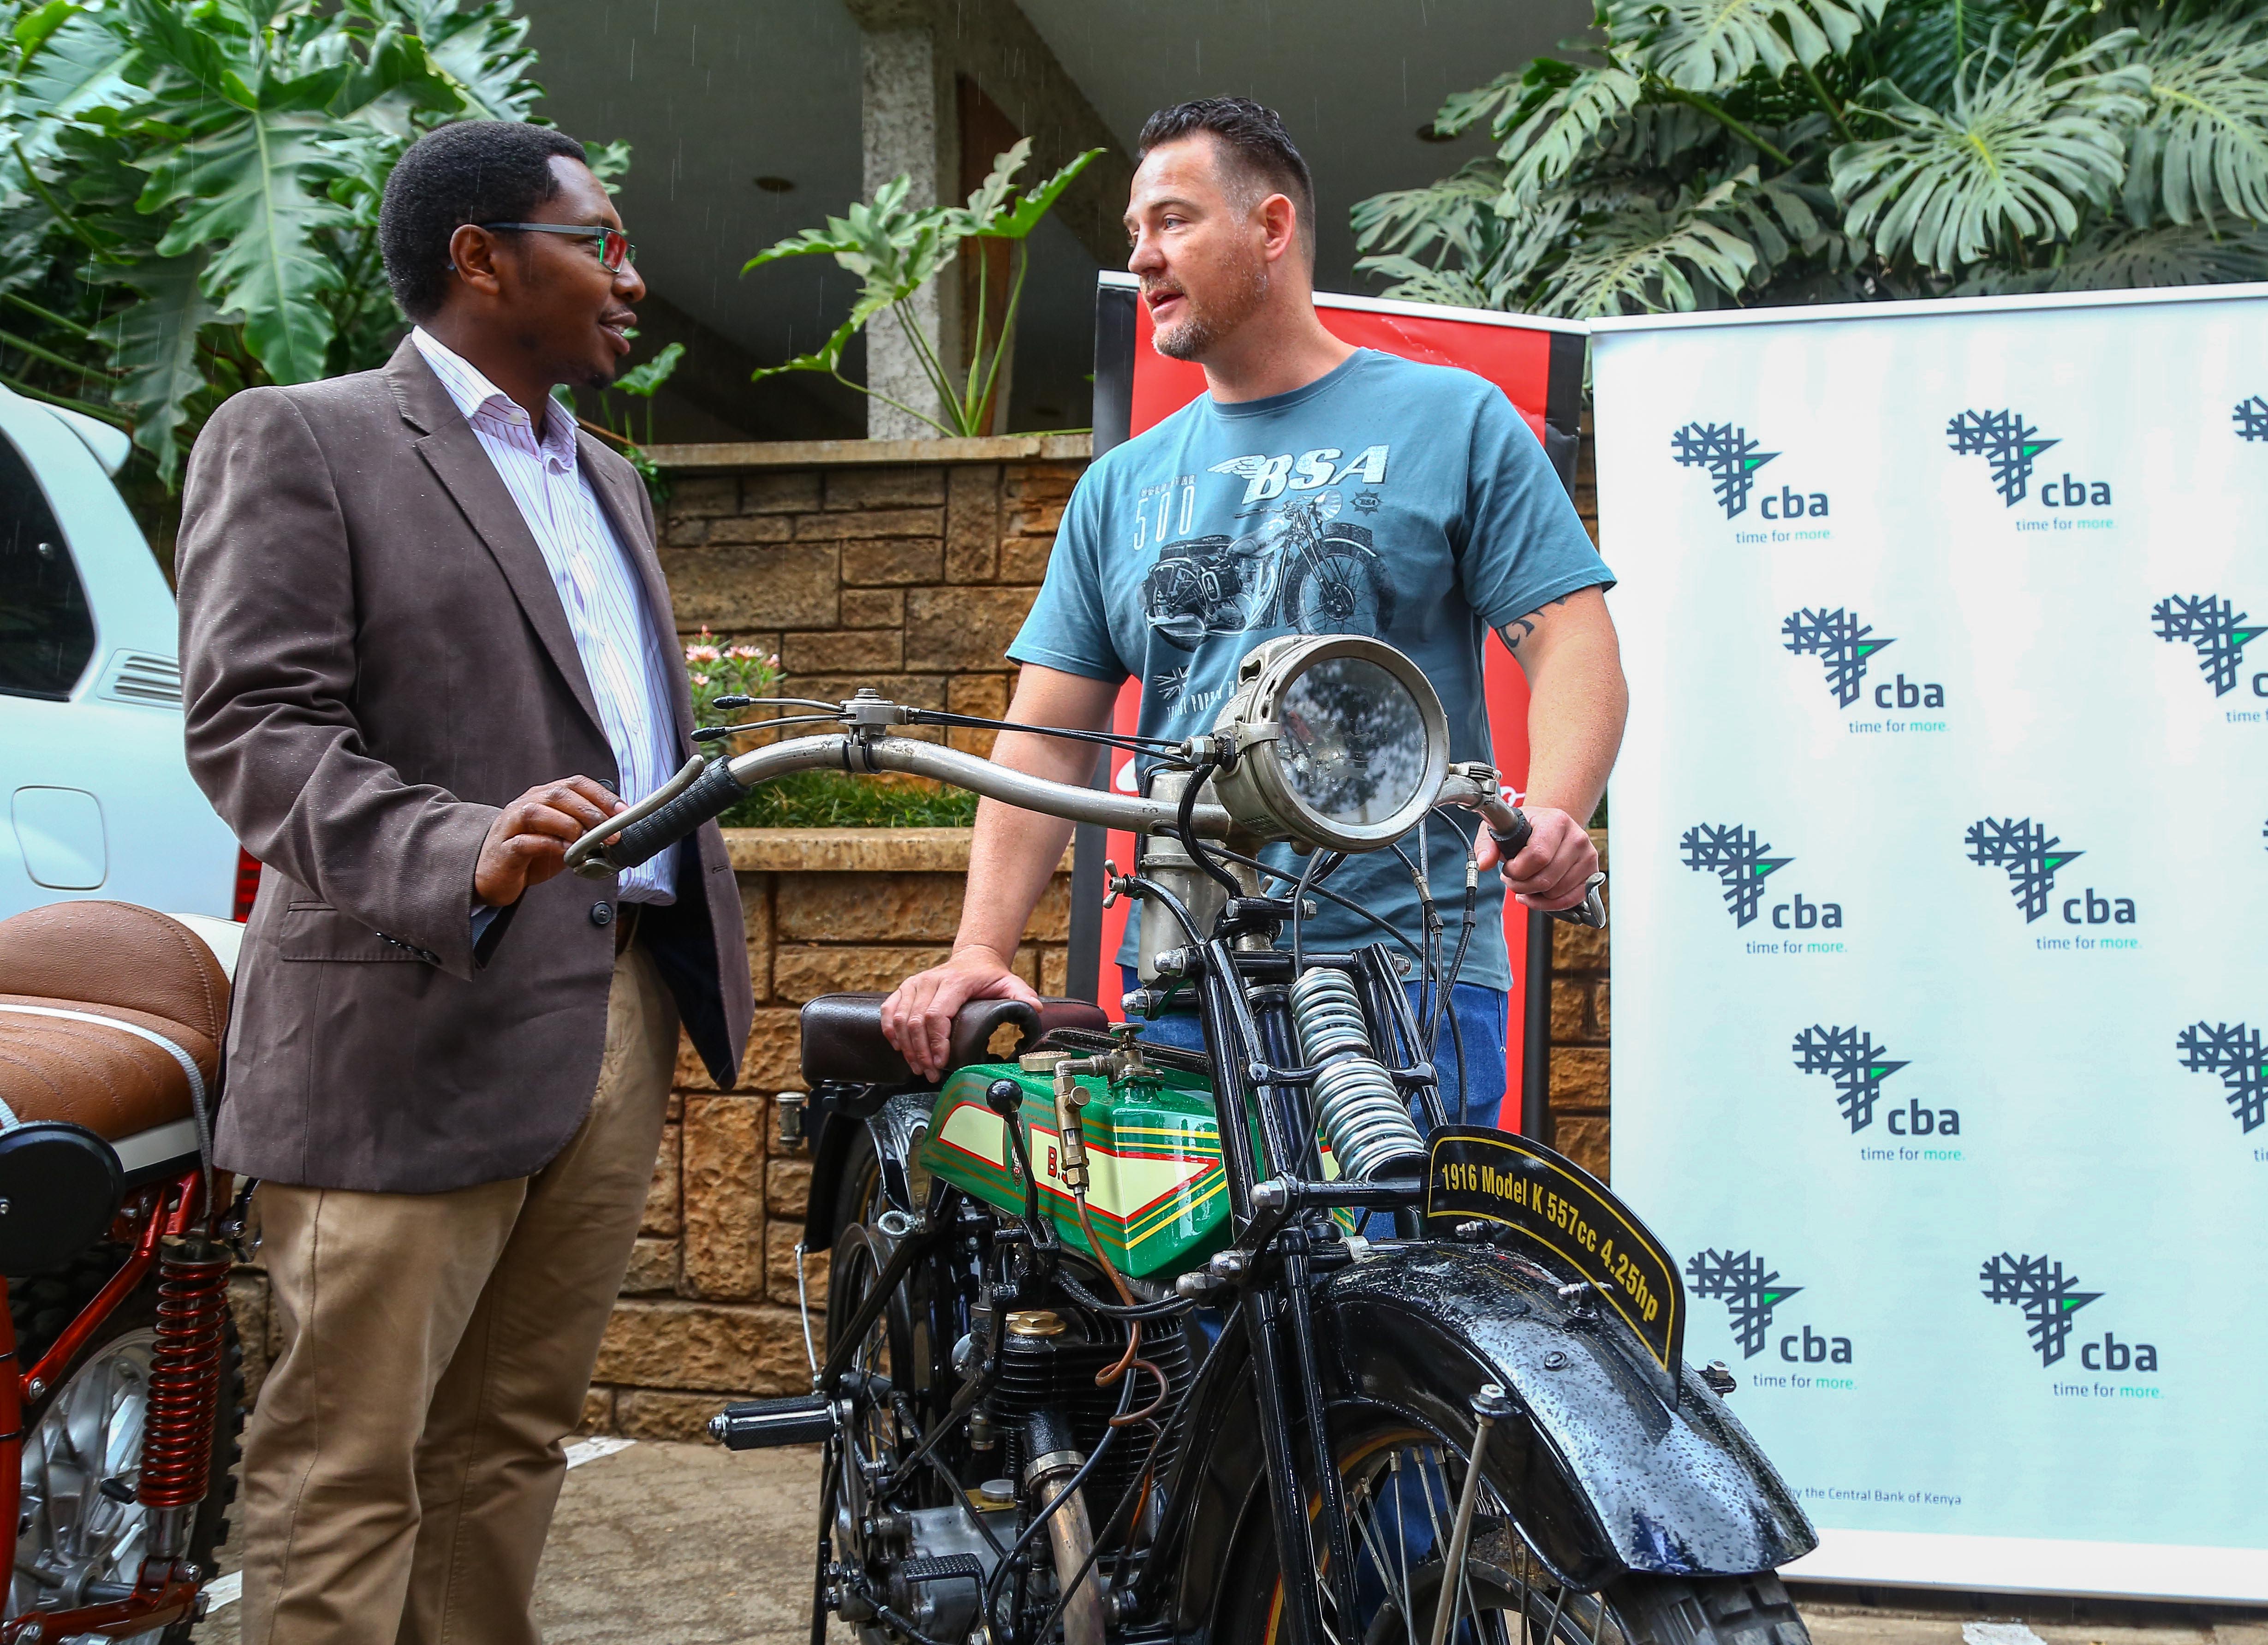 Chris Pasha(left)Group Head of Marketing CBA his taken through the contours of andhistory of a 1916 BSA model motorcycle by the owner Bevan Beckmann, a head ofthe 2019 Concours D’elegance.